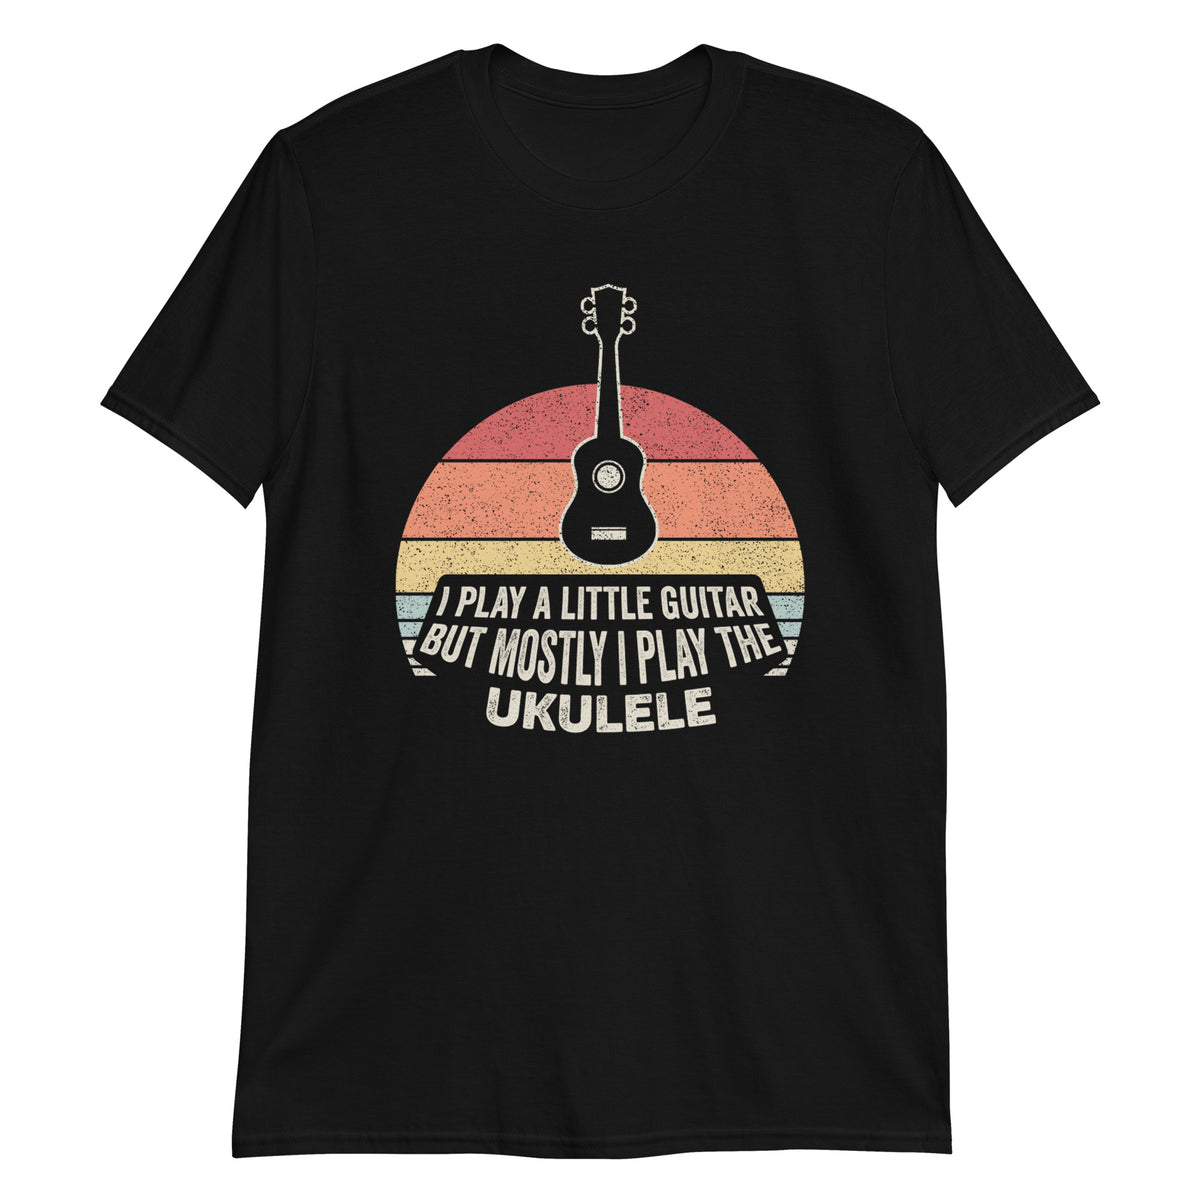 I Play a Little Guitar But Mostly I Play The Ukulele Funny T-Shirt